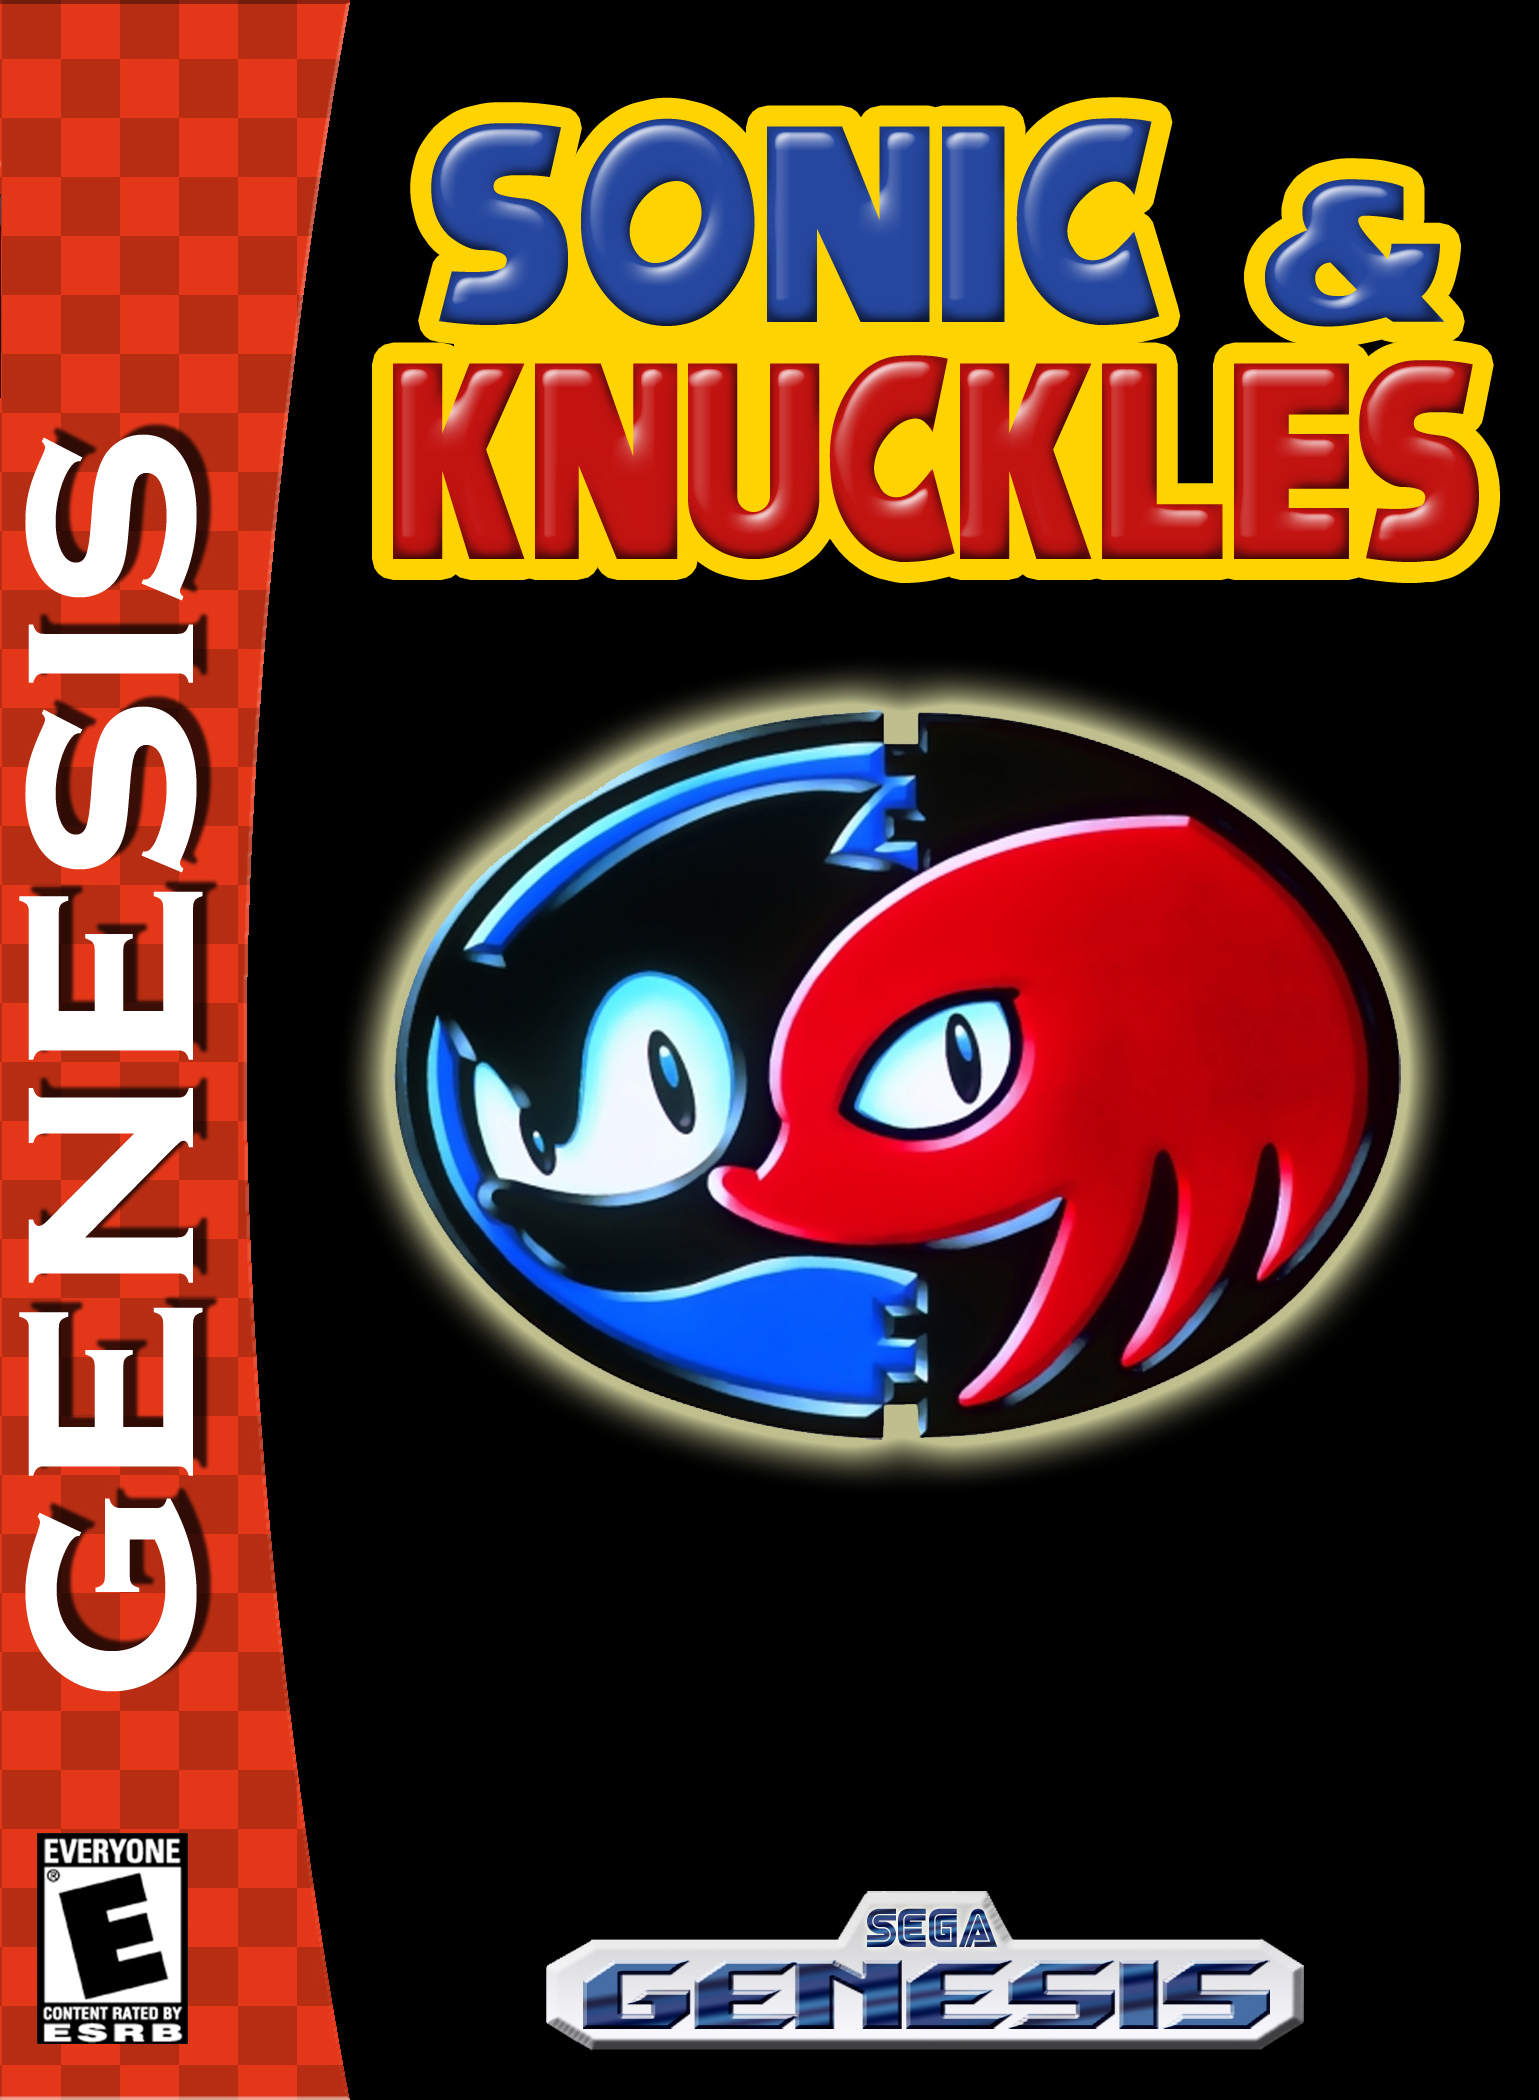 Sonic knuckles air. Sonic and Knuckles картридж. Картридж сега Соник 3 и НАКЛЗ. Картриджи Sega Sonic 3 and Knuckles. Sonic Knuckles Sega картридж.